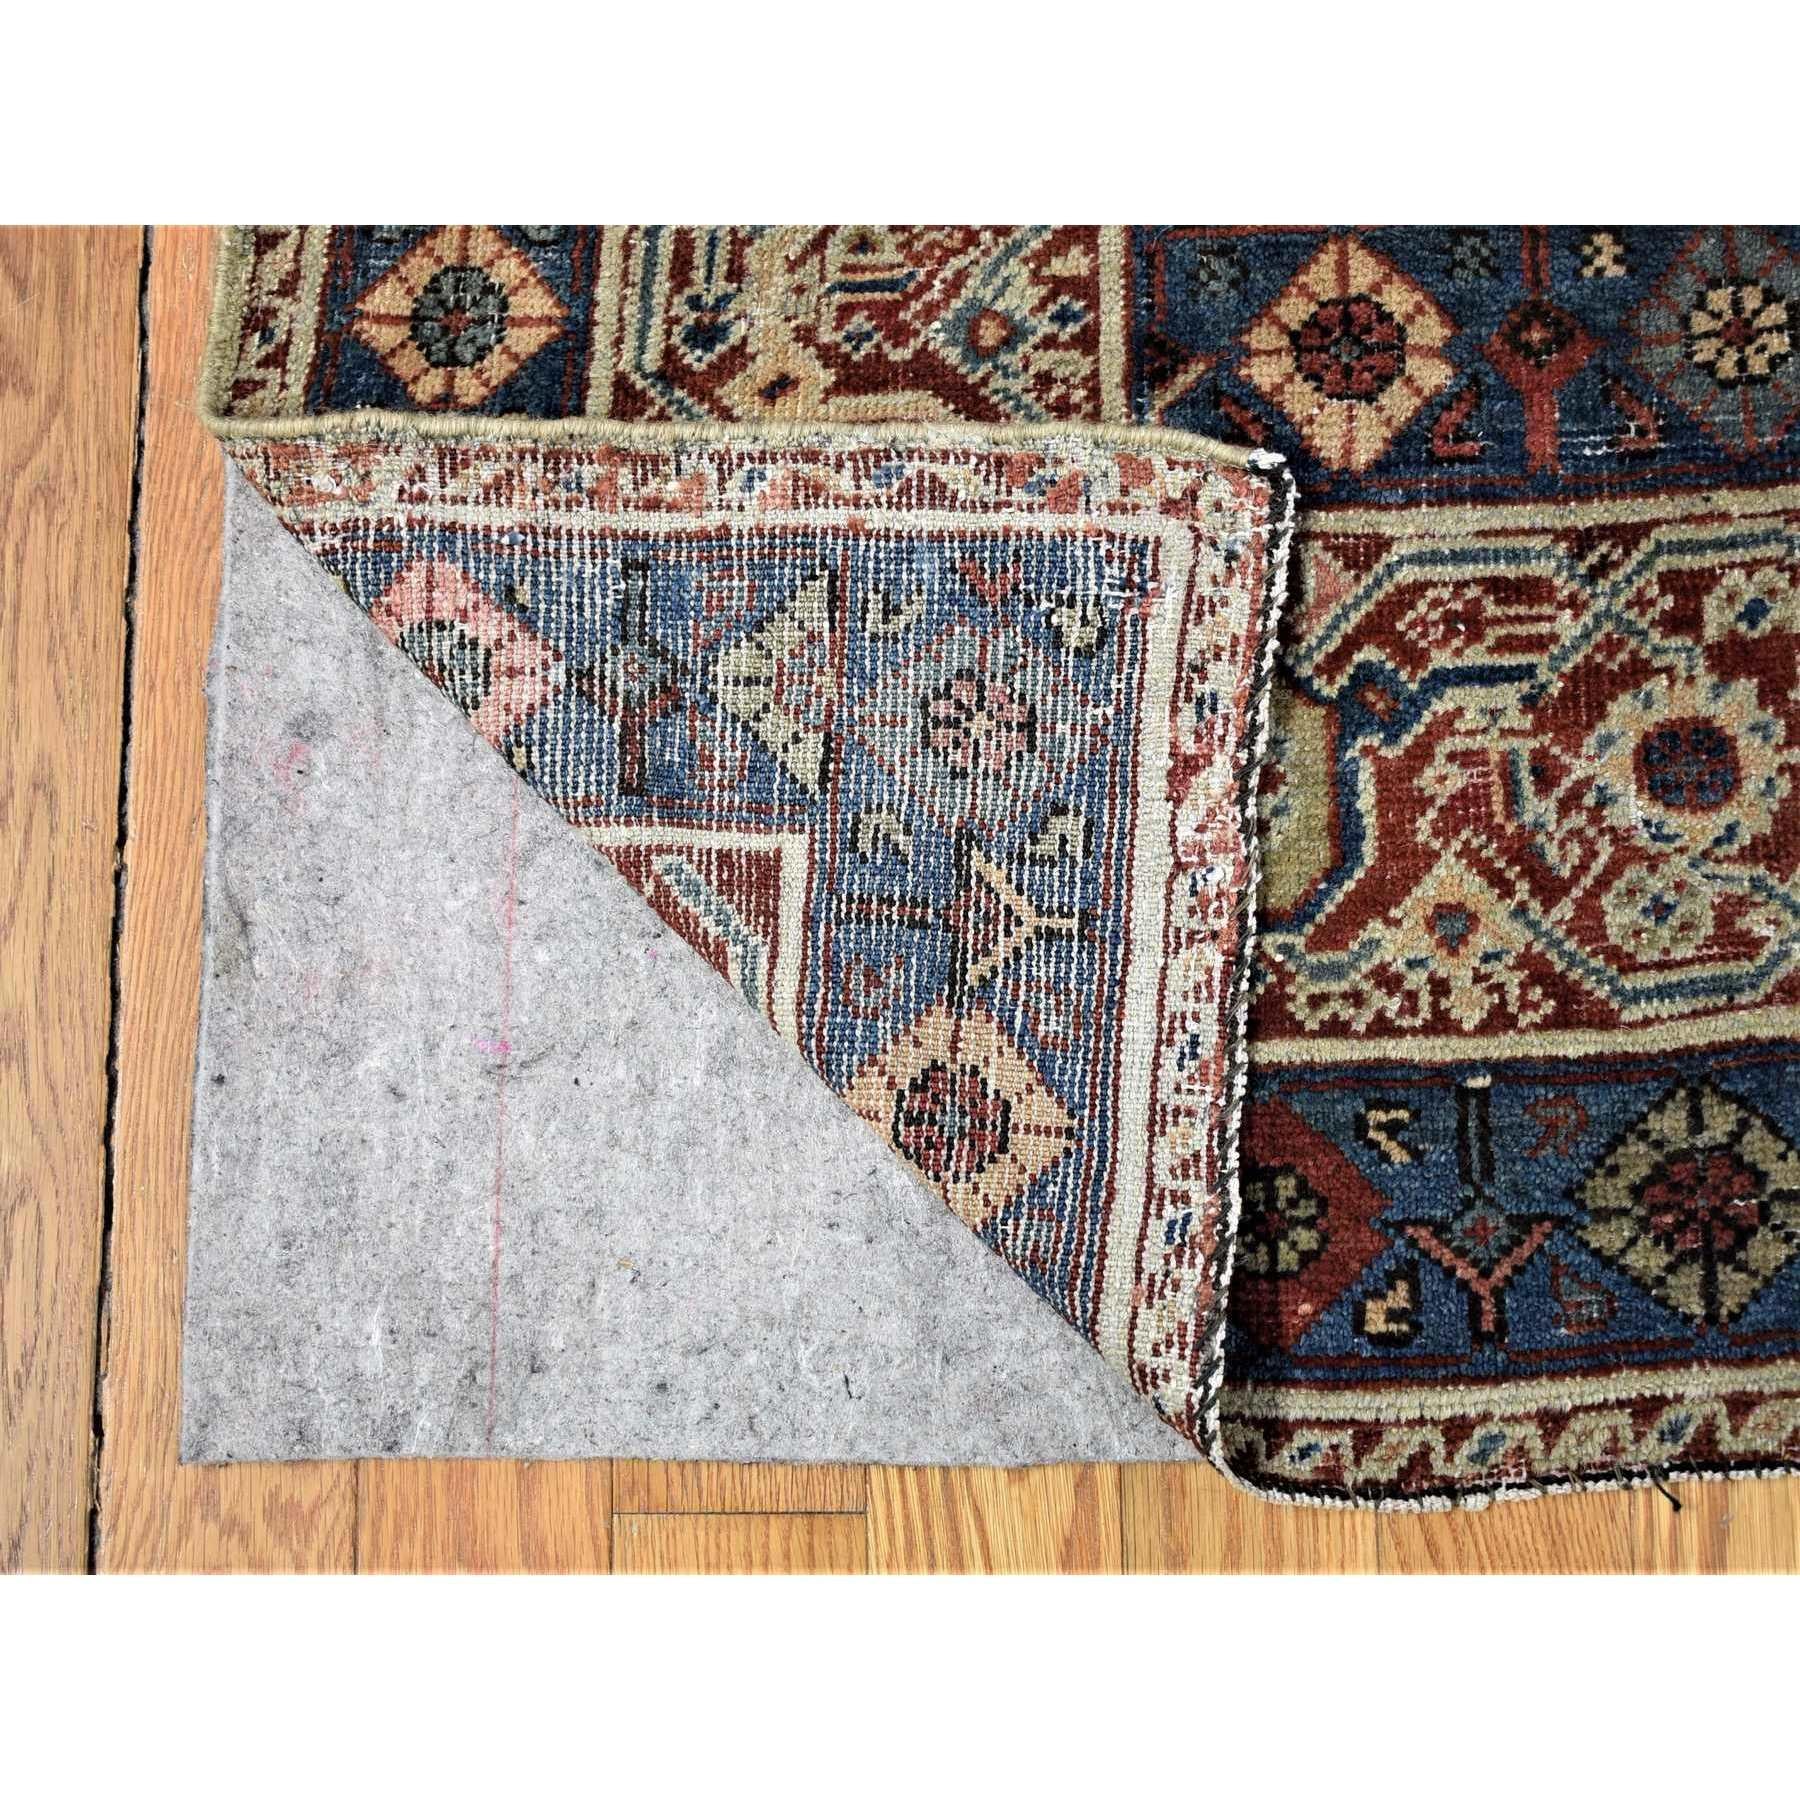 Beige, Handmade Antique Persian Mahal, Areas of Wear, Pure Wool, Oversized Rug In Good Condition For Sale In Carlstadt, NJ